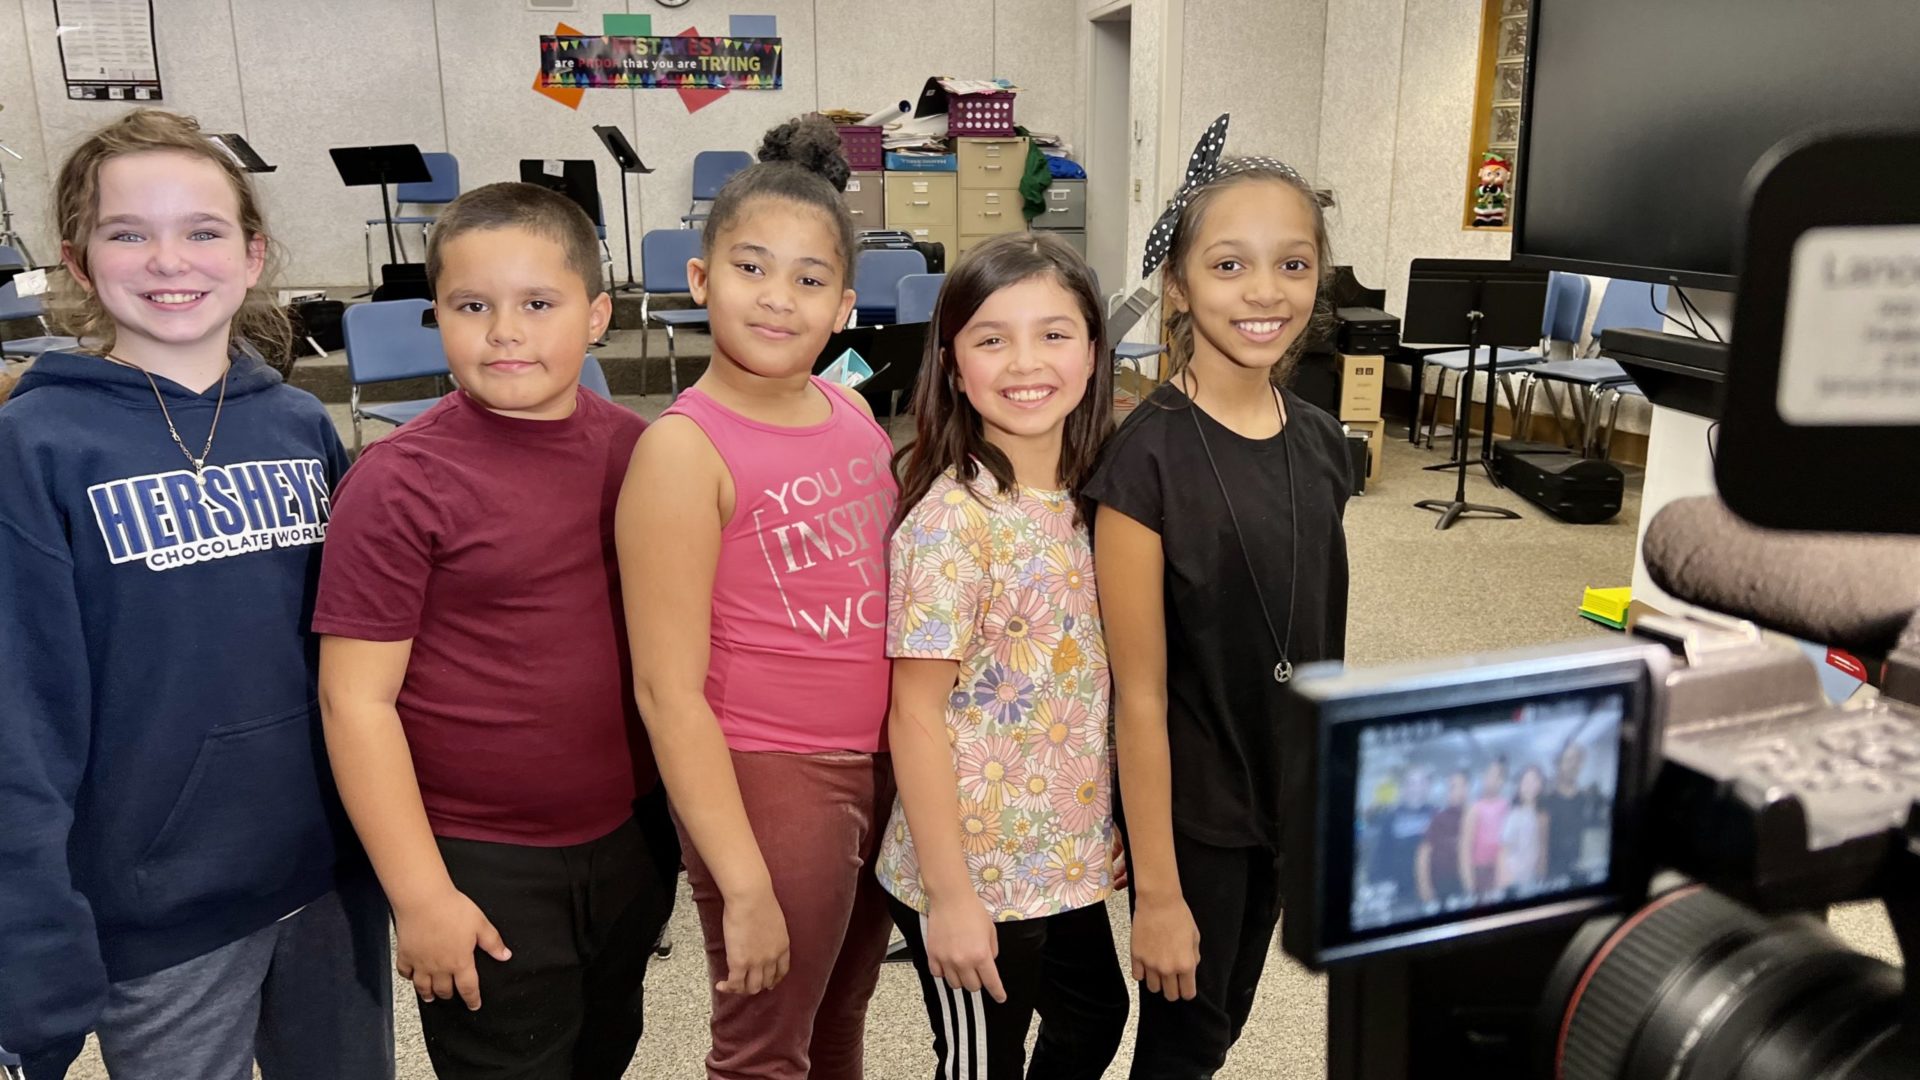 a racially diverse groupd of 5 elementary students, left to right girl, boy, girl, girl, girl, and a video camera in the bottom right of the frame